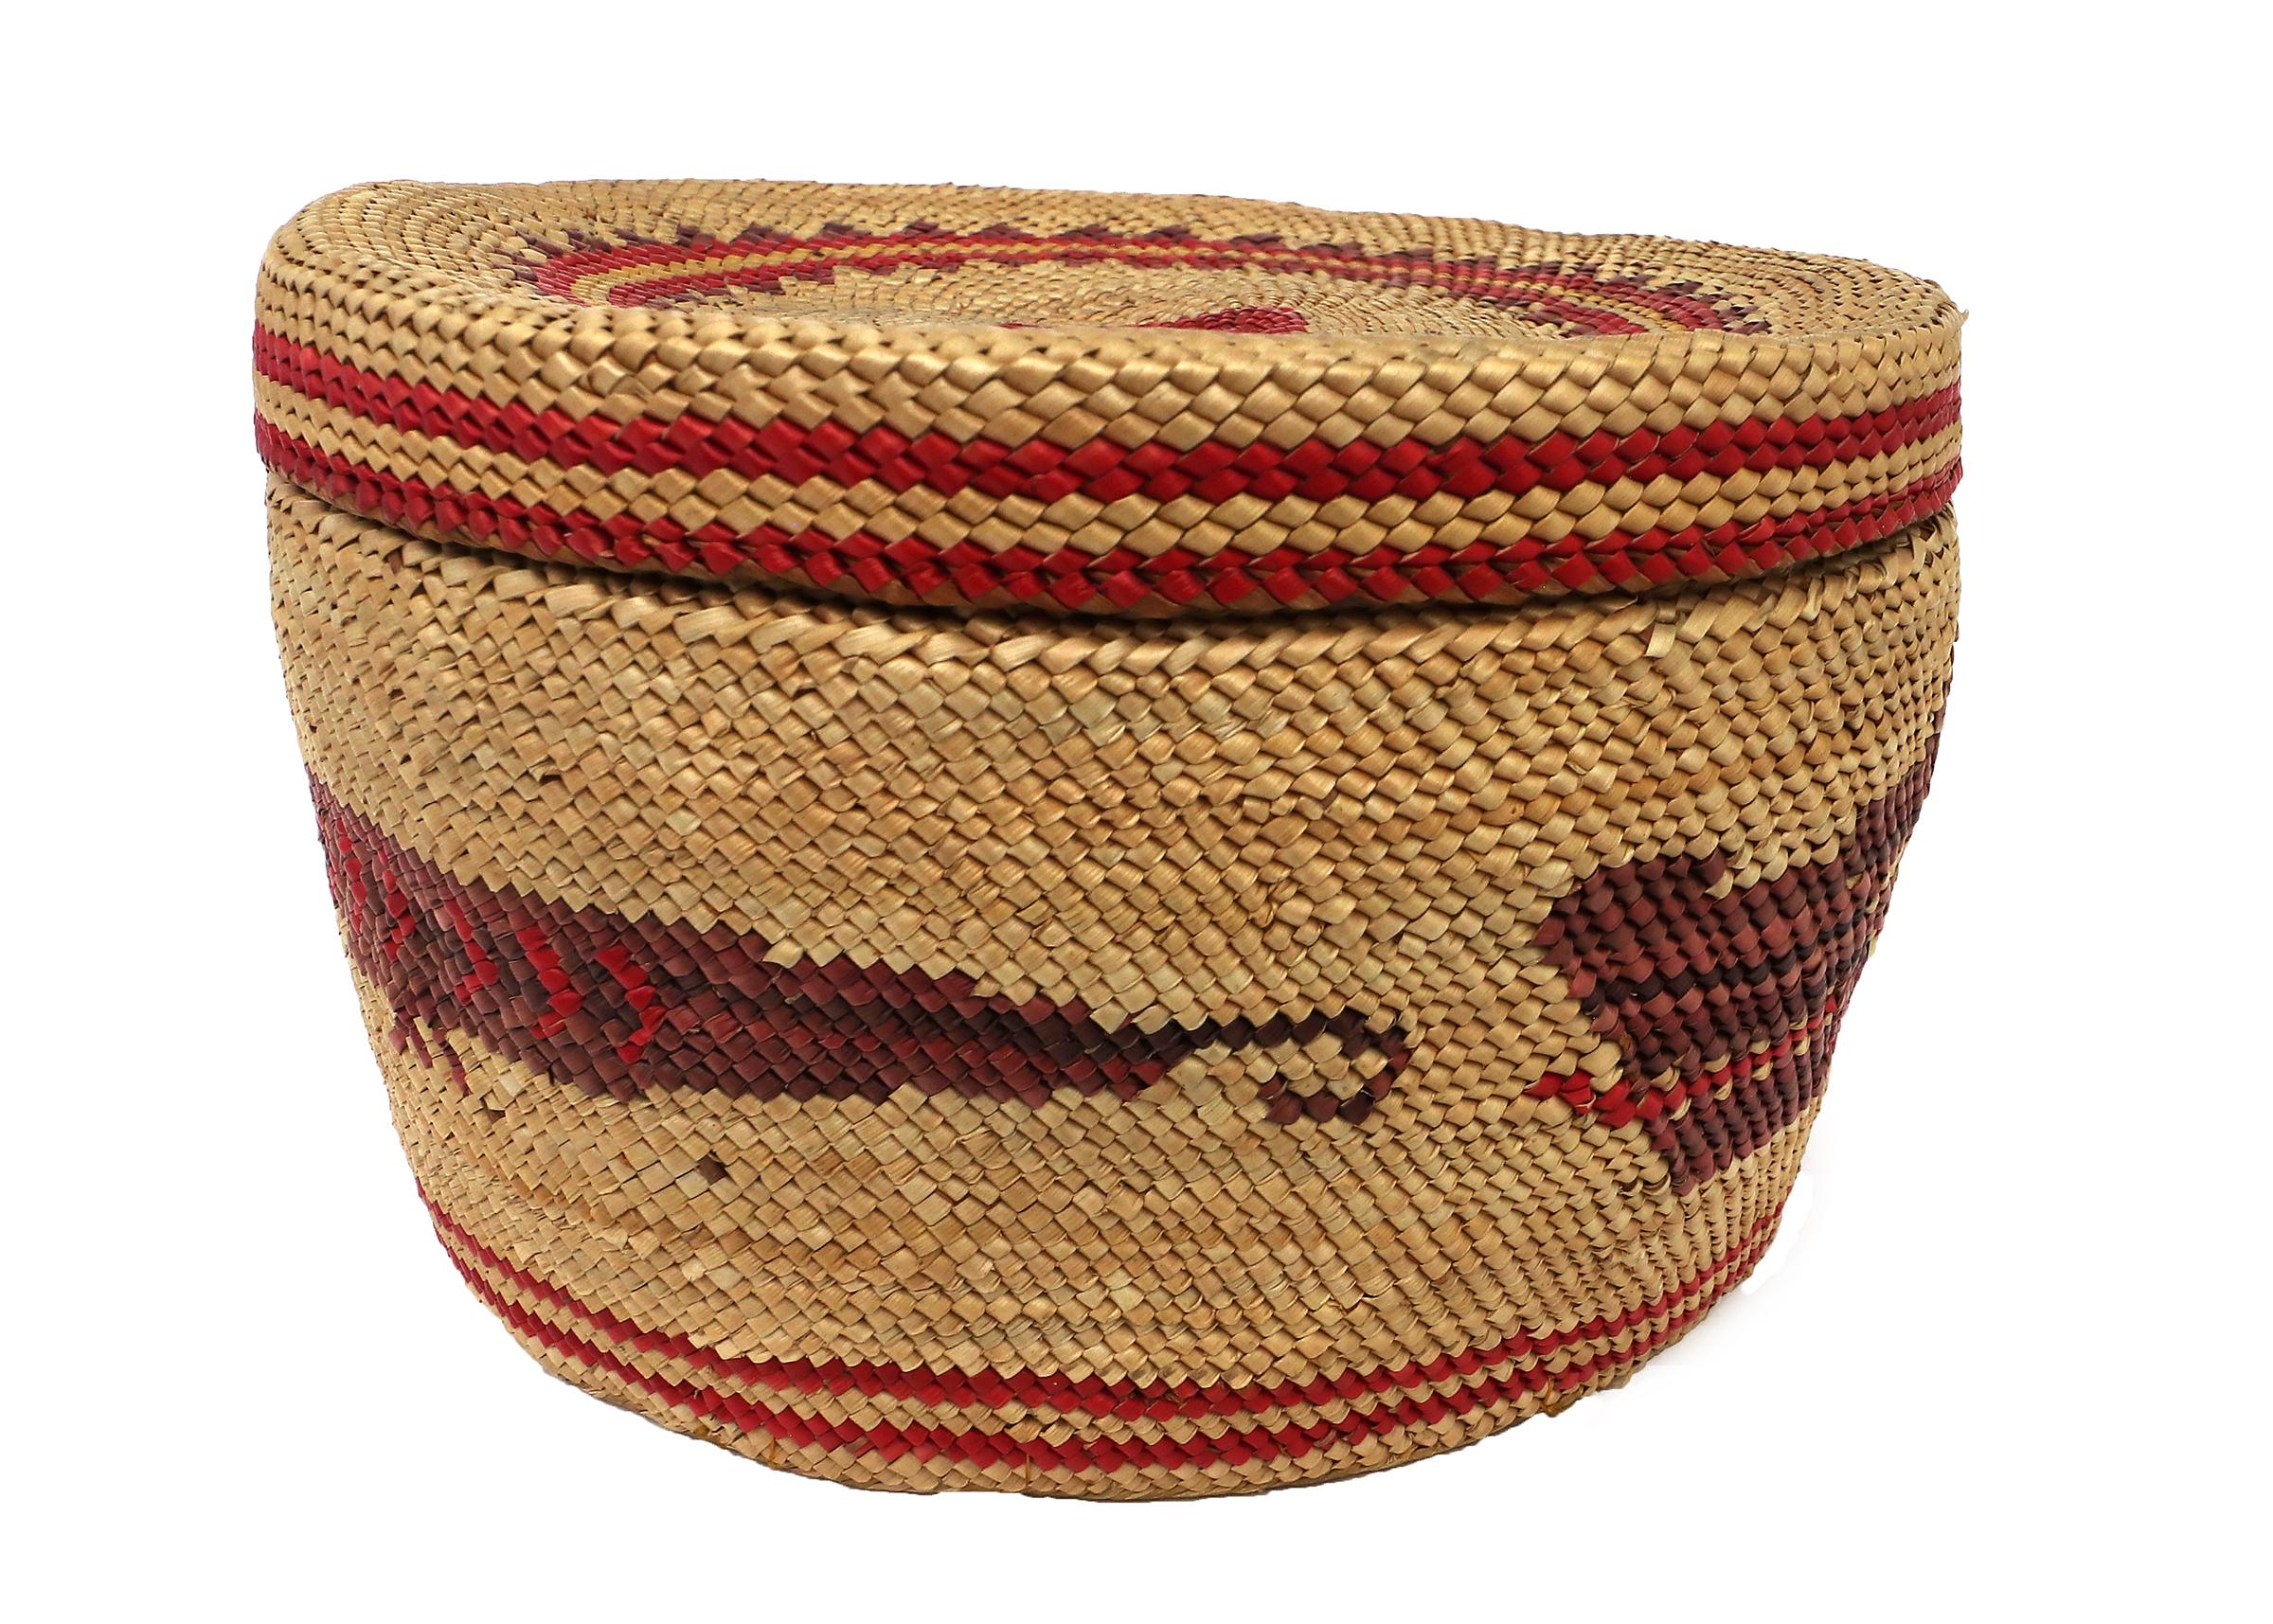 Nootka Northwest Coast 1900 Woven Basket with Top, Red and Black Designs For Sale 4